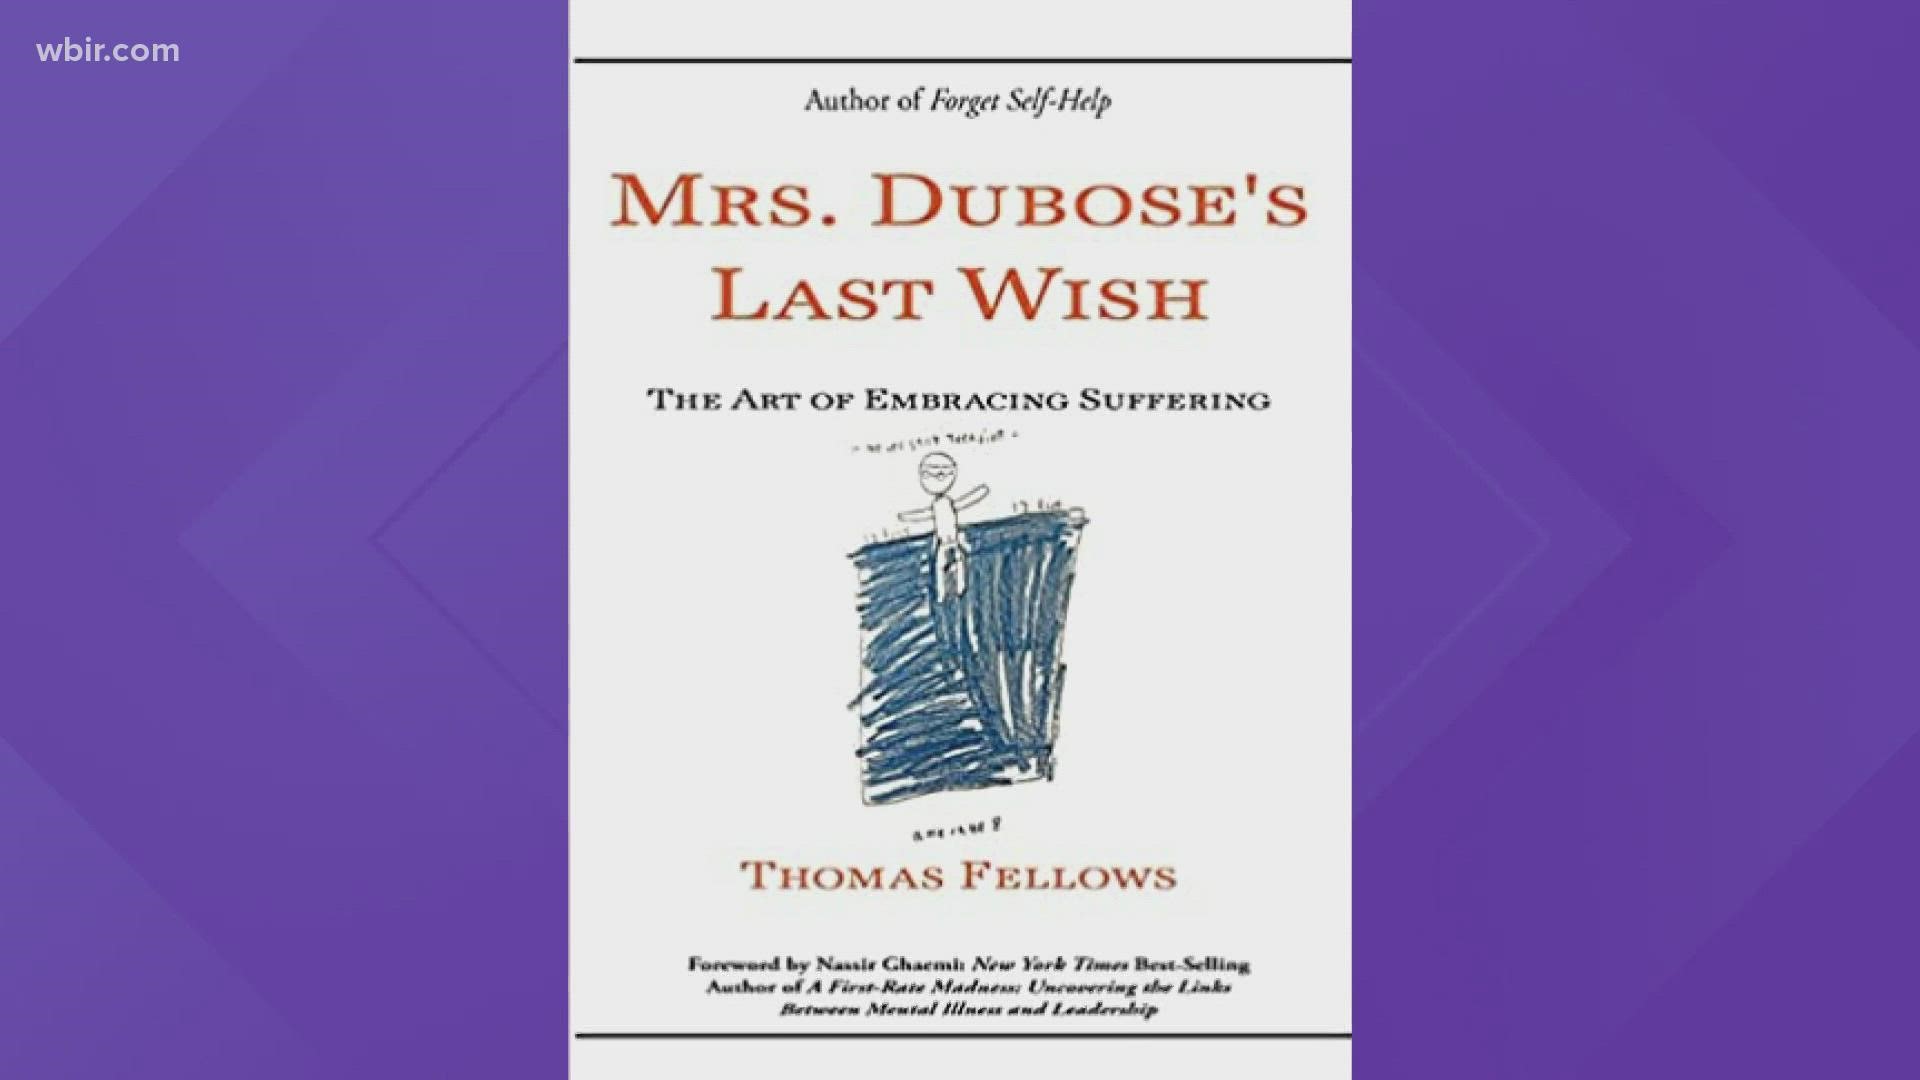 Thomas Fellows is the author of "Mrs. Dubose's Last Wish: The Art of Embracing Suffering". May 24, 2022-4pm.